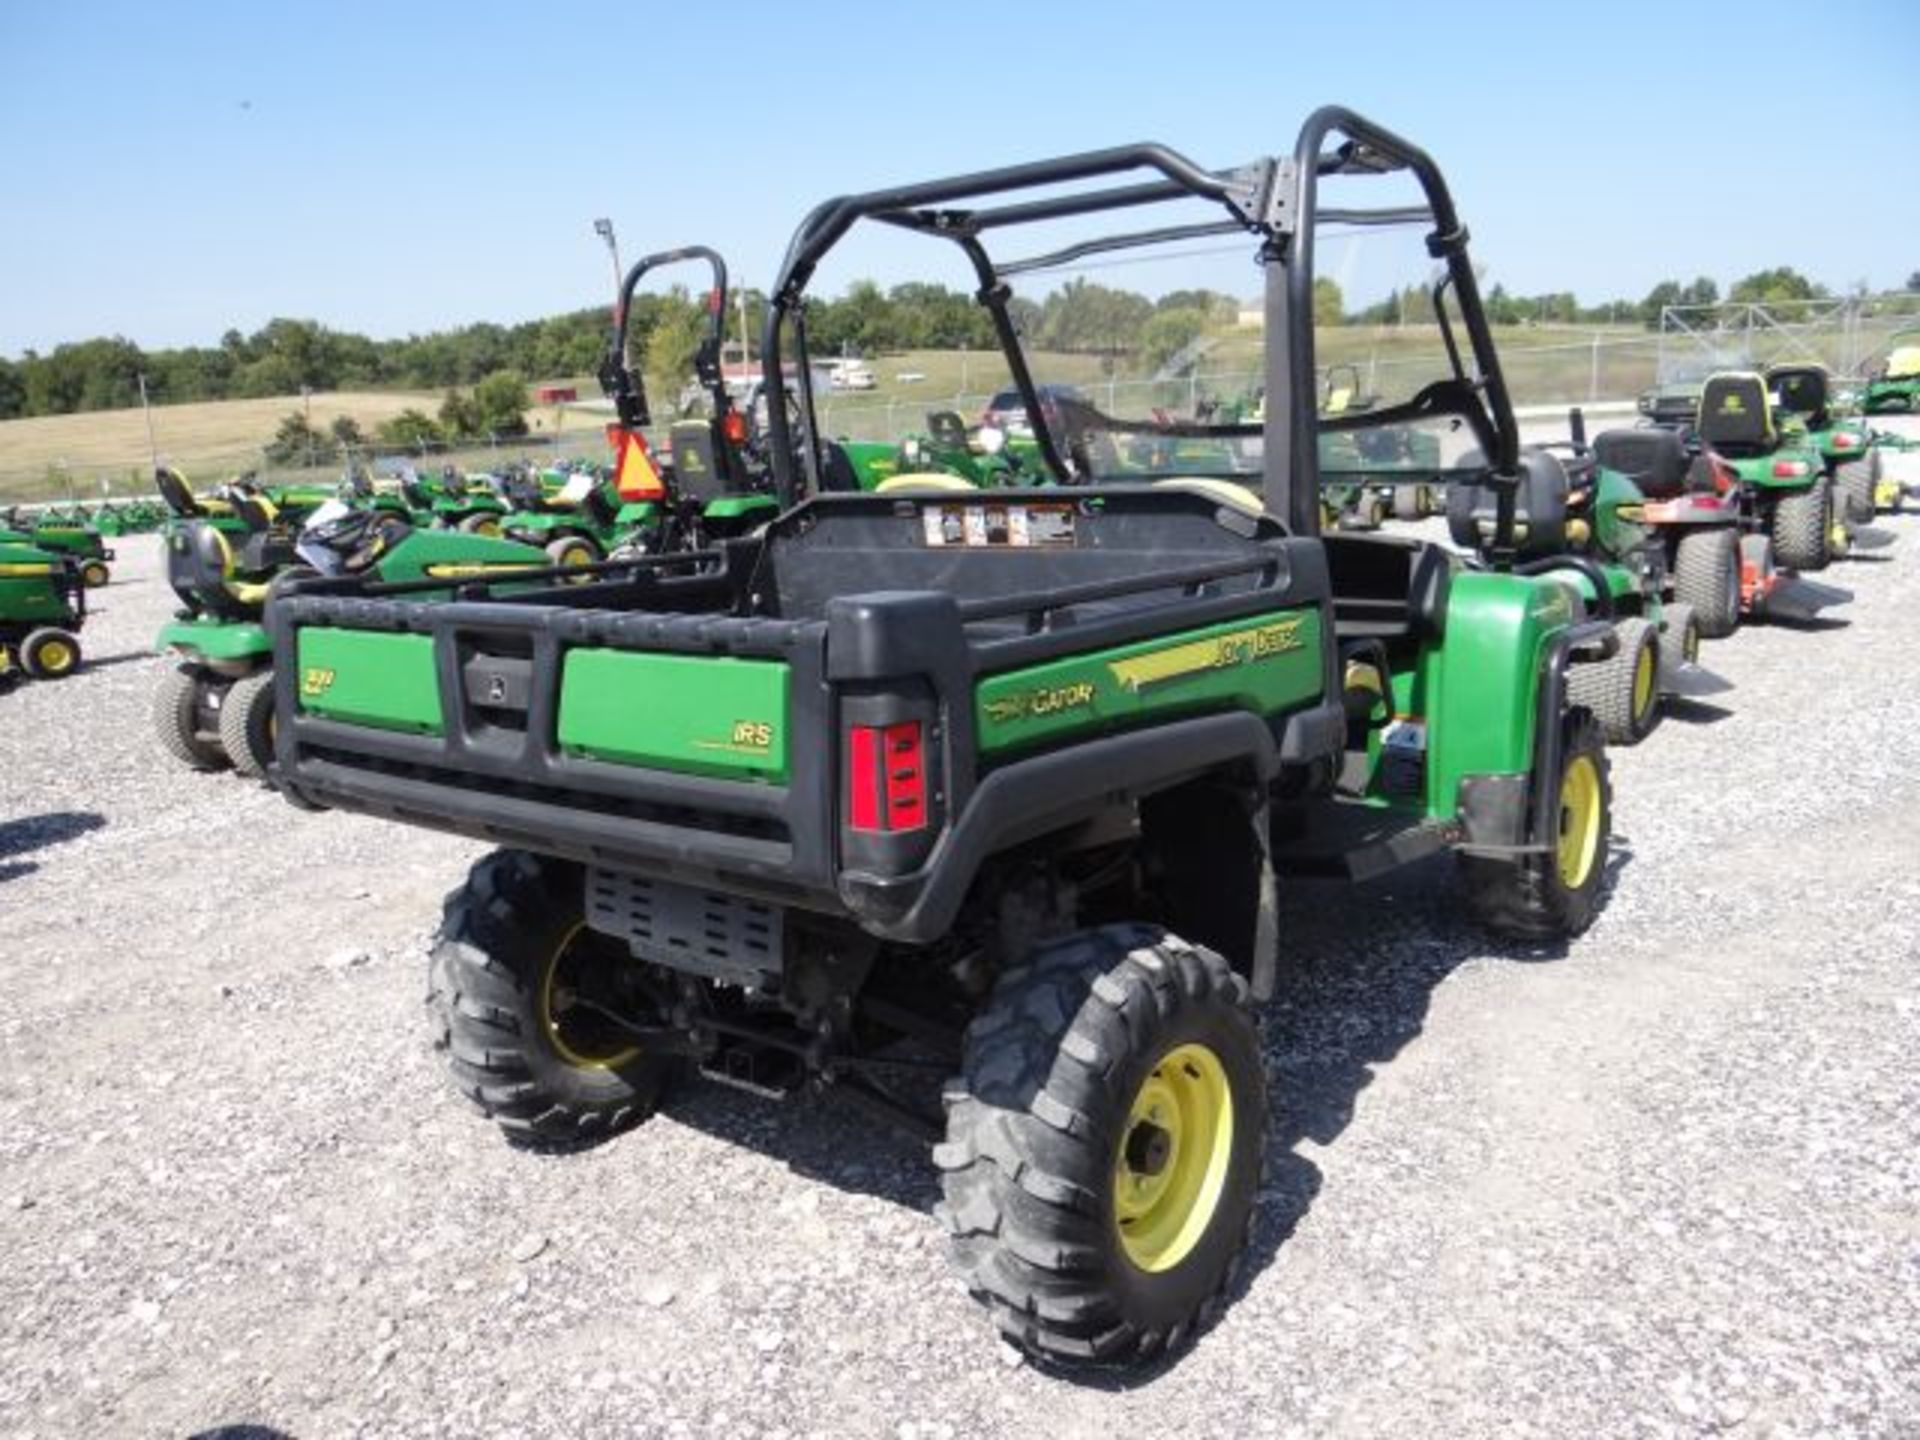 2011 JD 625i XUV Gator 992 hrs, Steel Wheels, Traction Tires, No Scratch Windshield, Bed Lift Kit, - Image 3 of 3